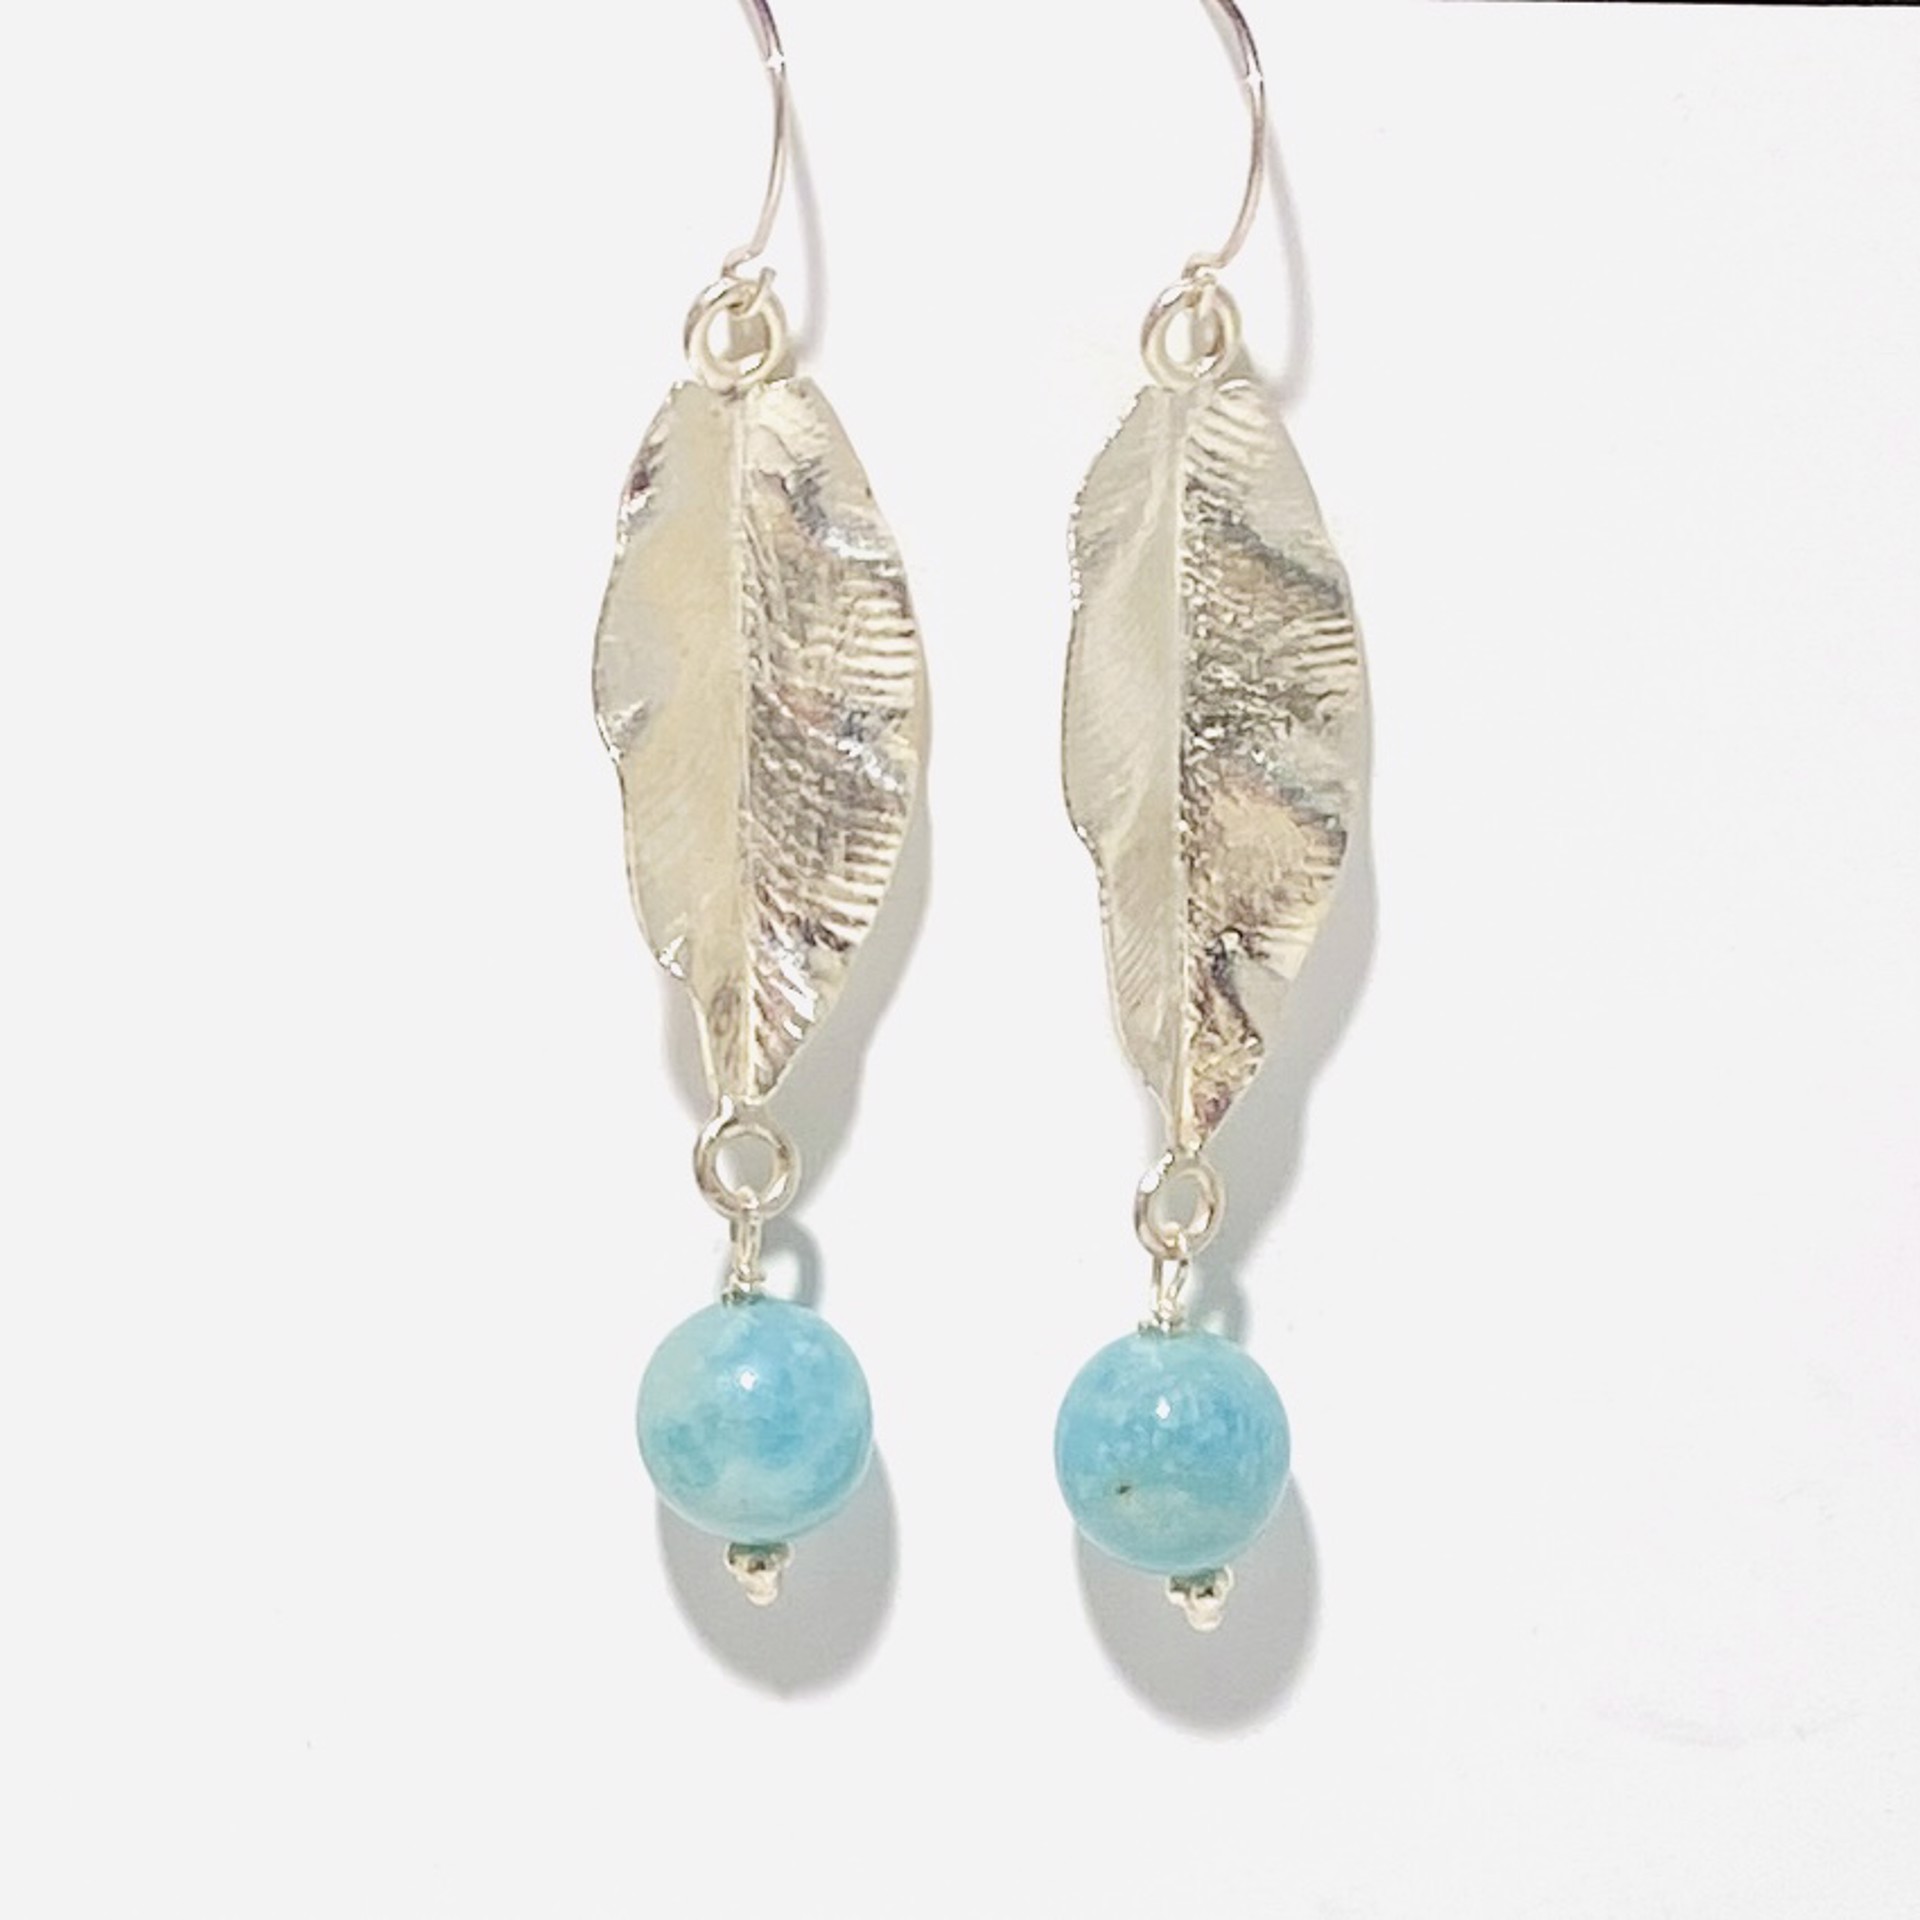 Sterling Leaf, Amazonite Earrings LR23-11 by Legare Riano